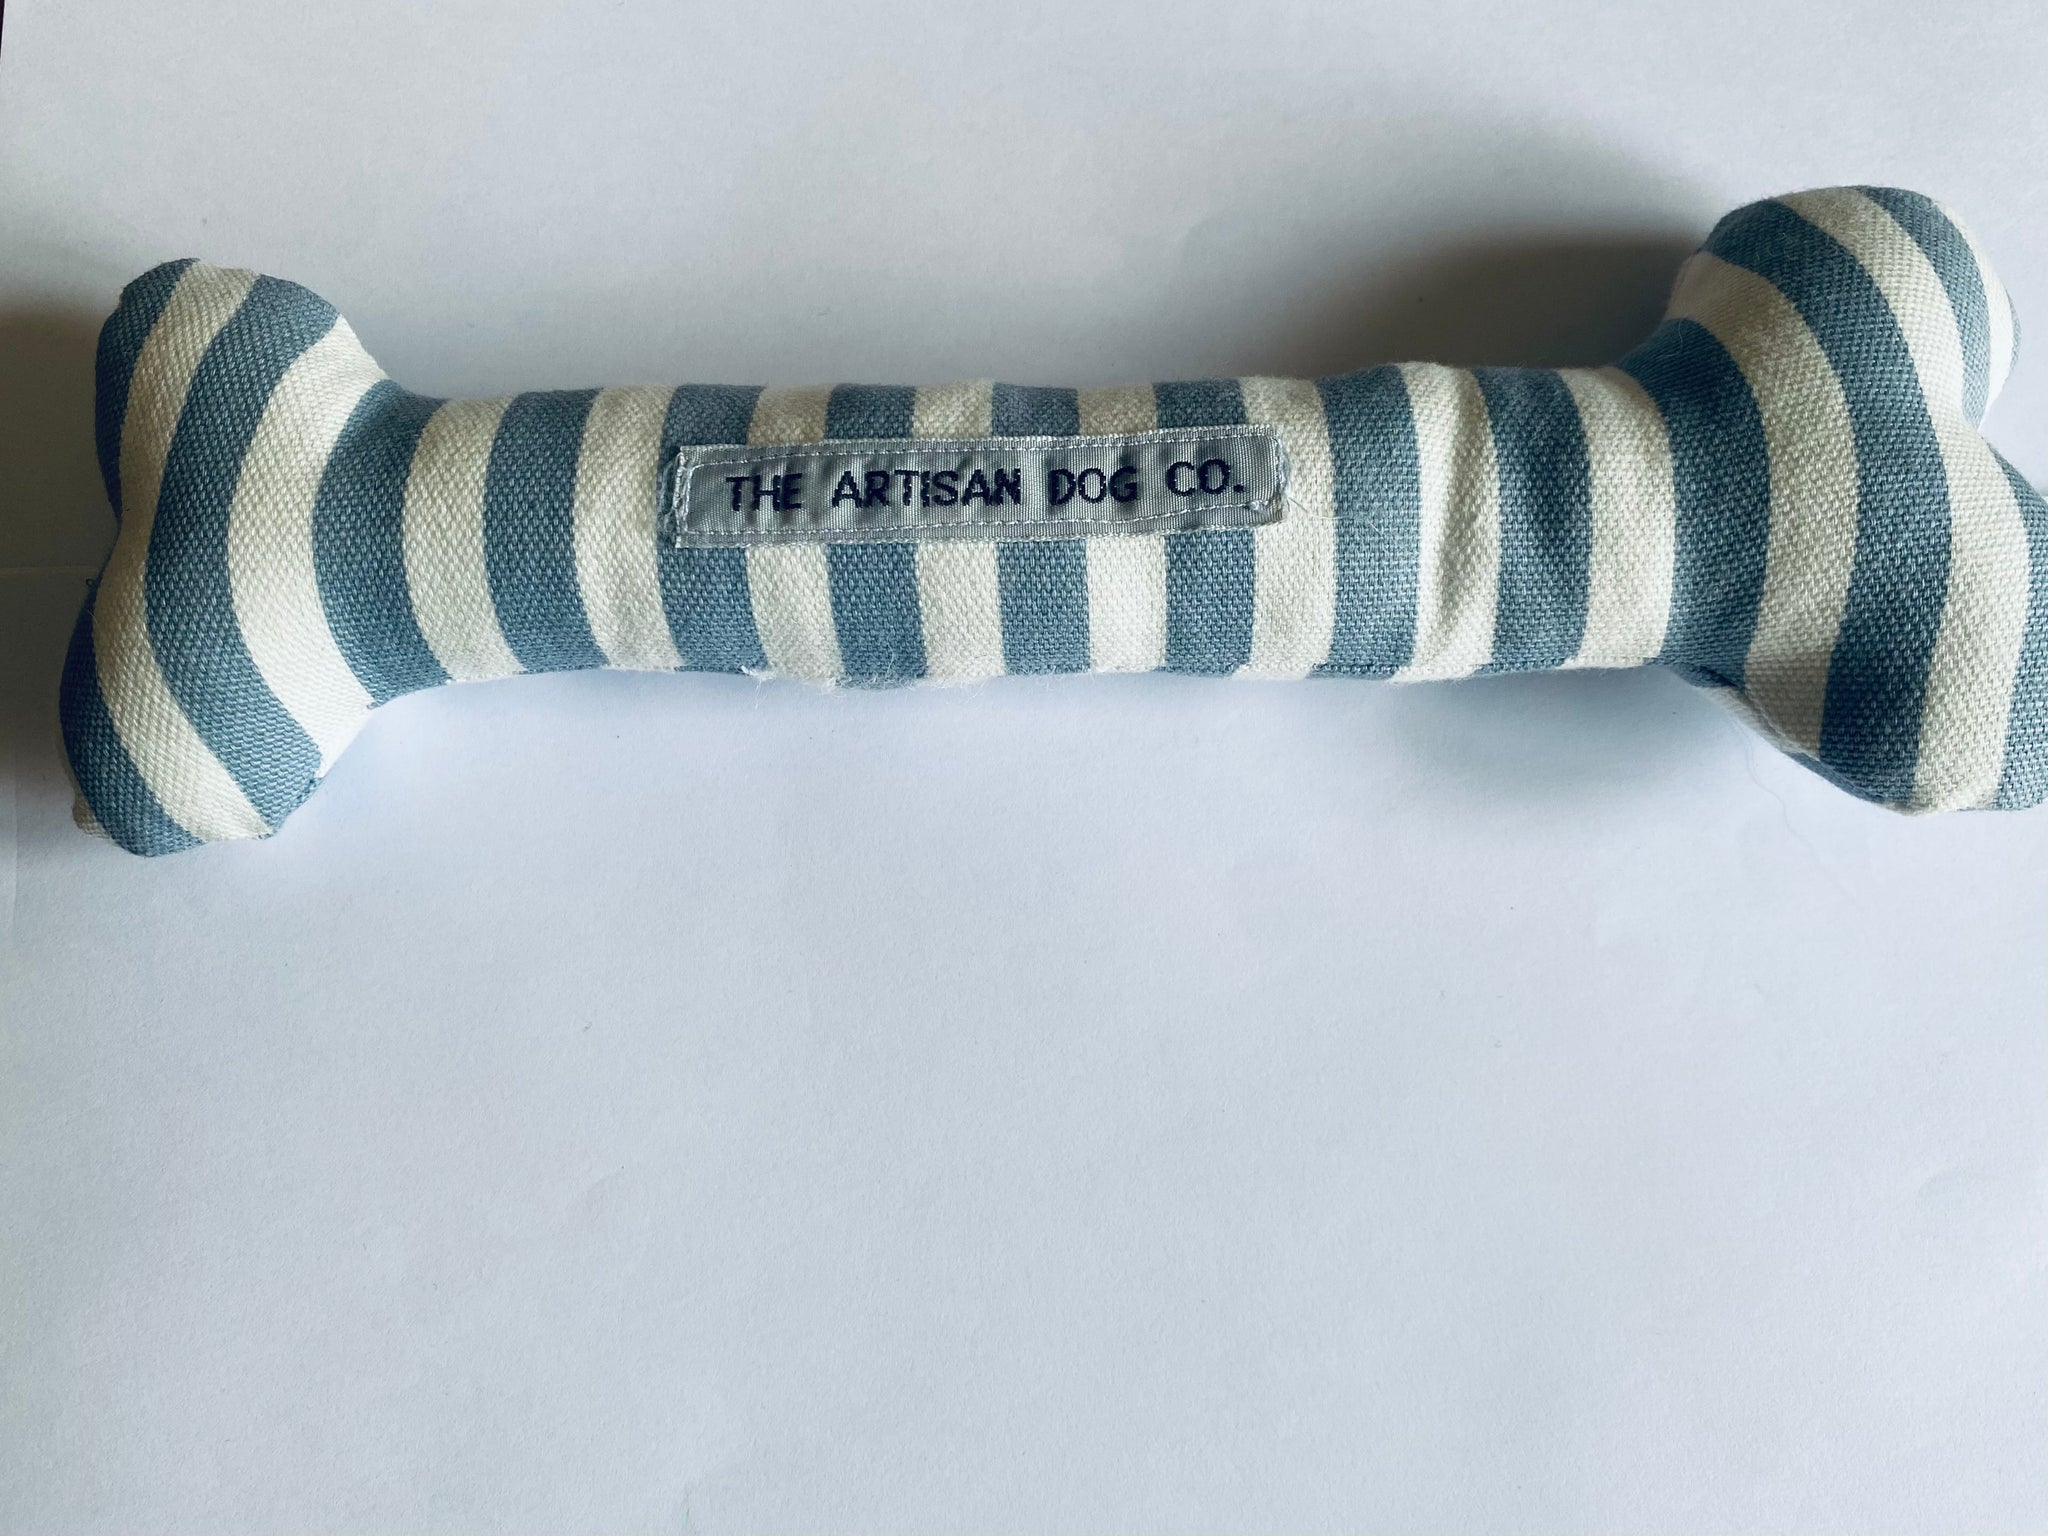 Handcrafted Toy Squeaky Dog Bone Stripes